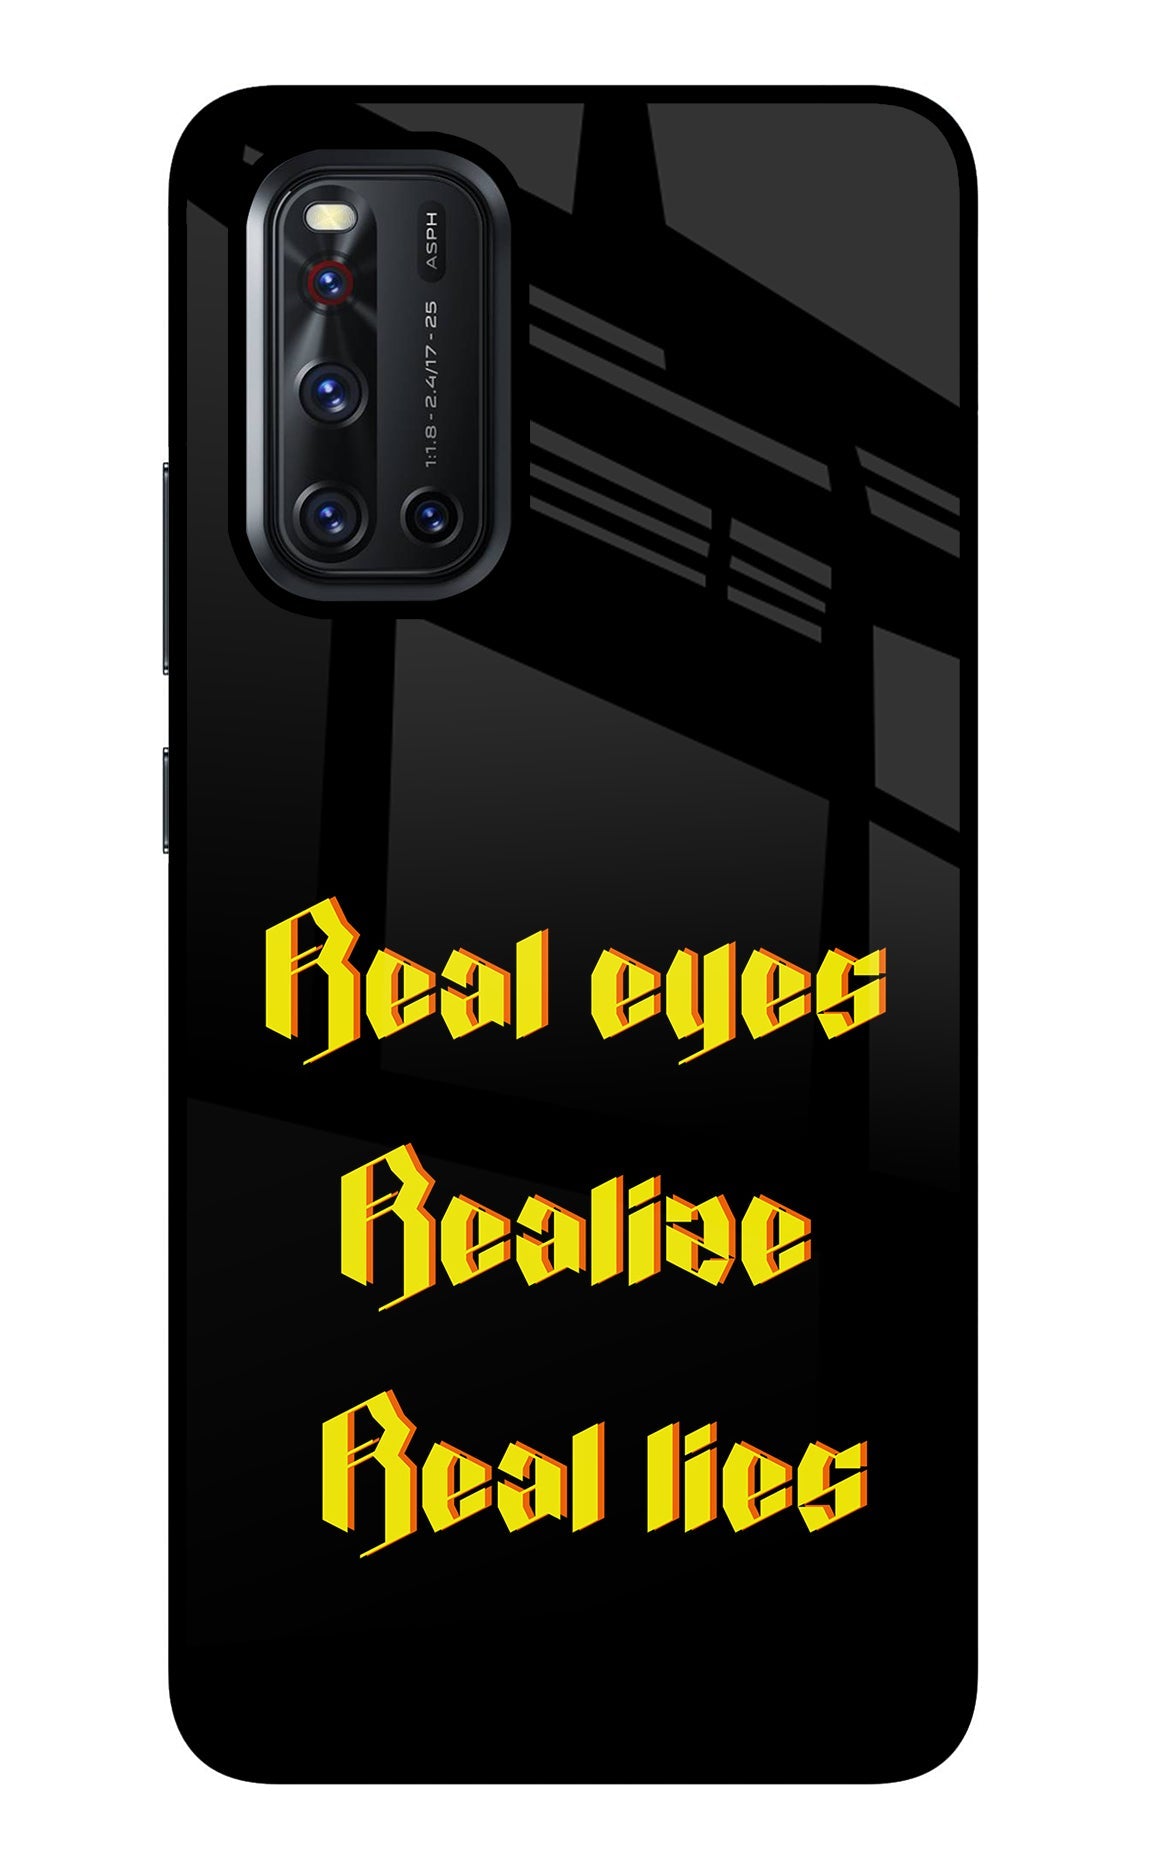 Real Eyes Realize Real Lies Vivo V19 Glass Case